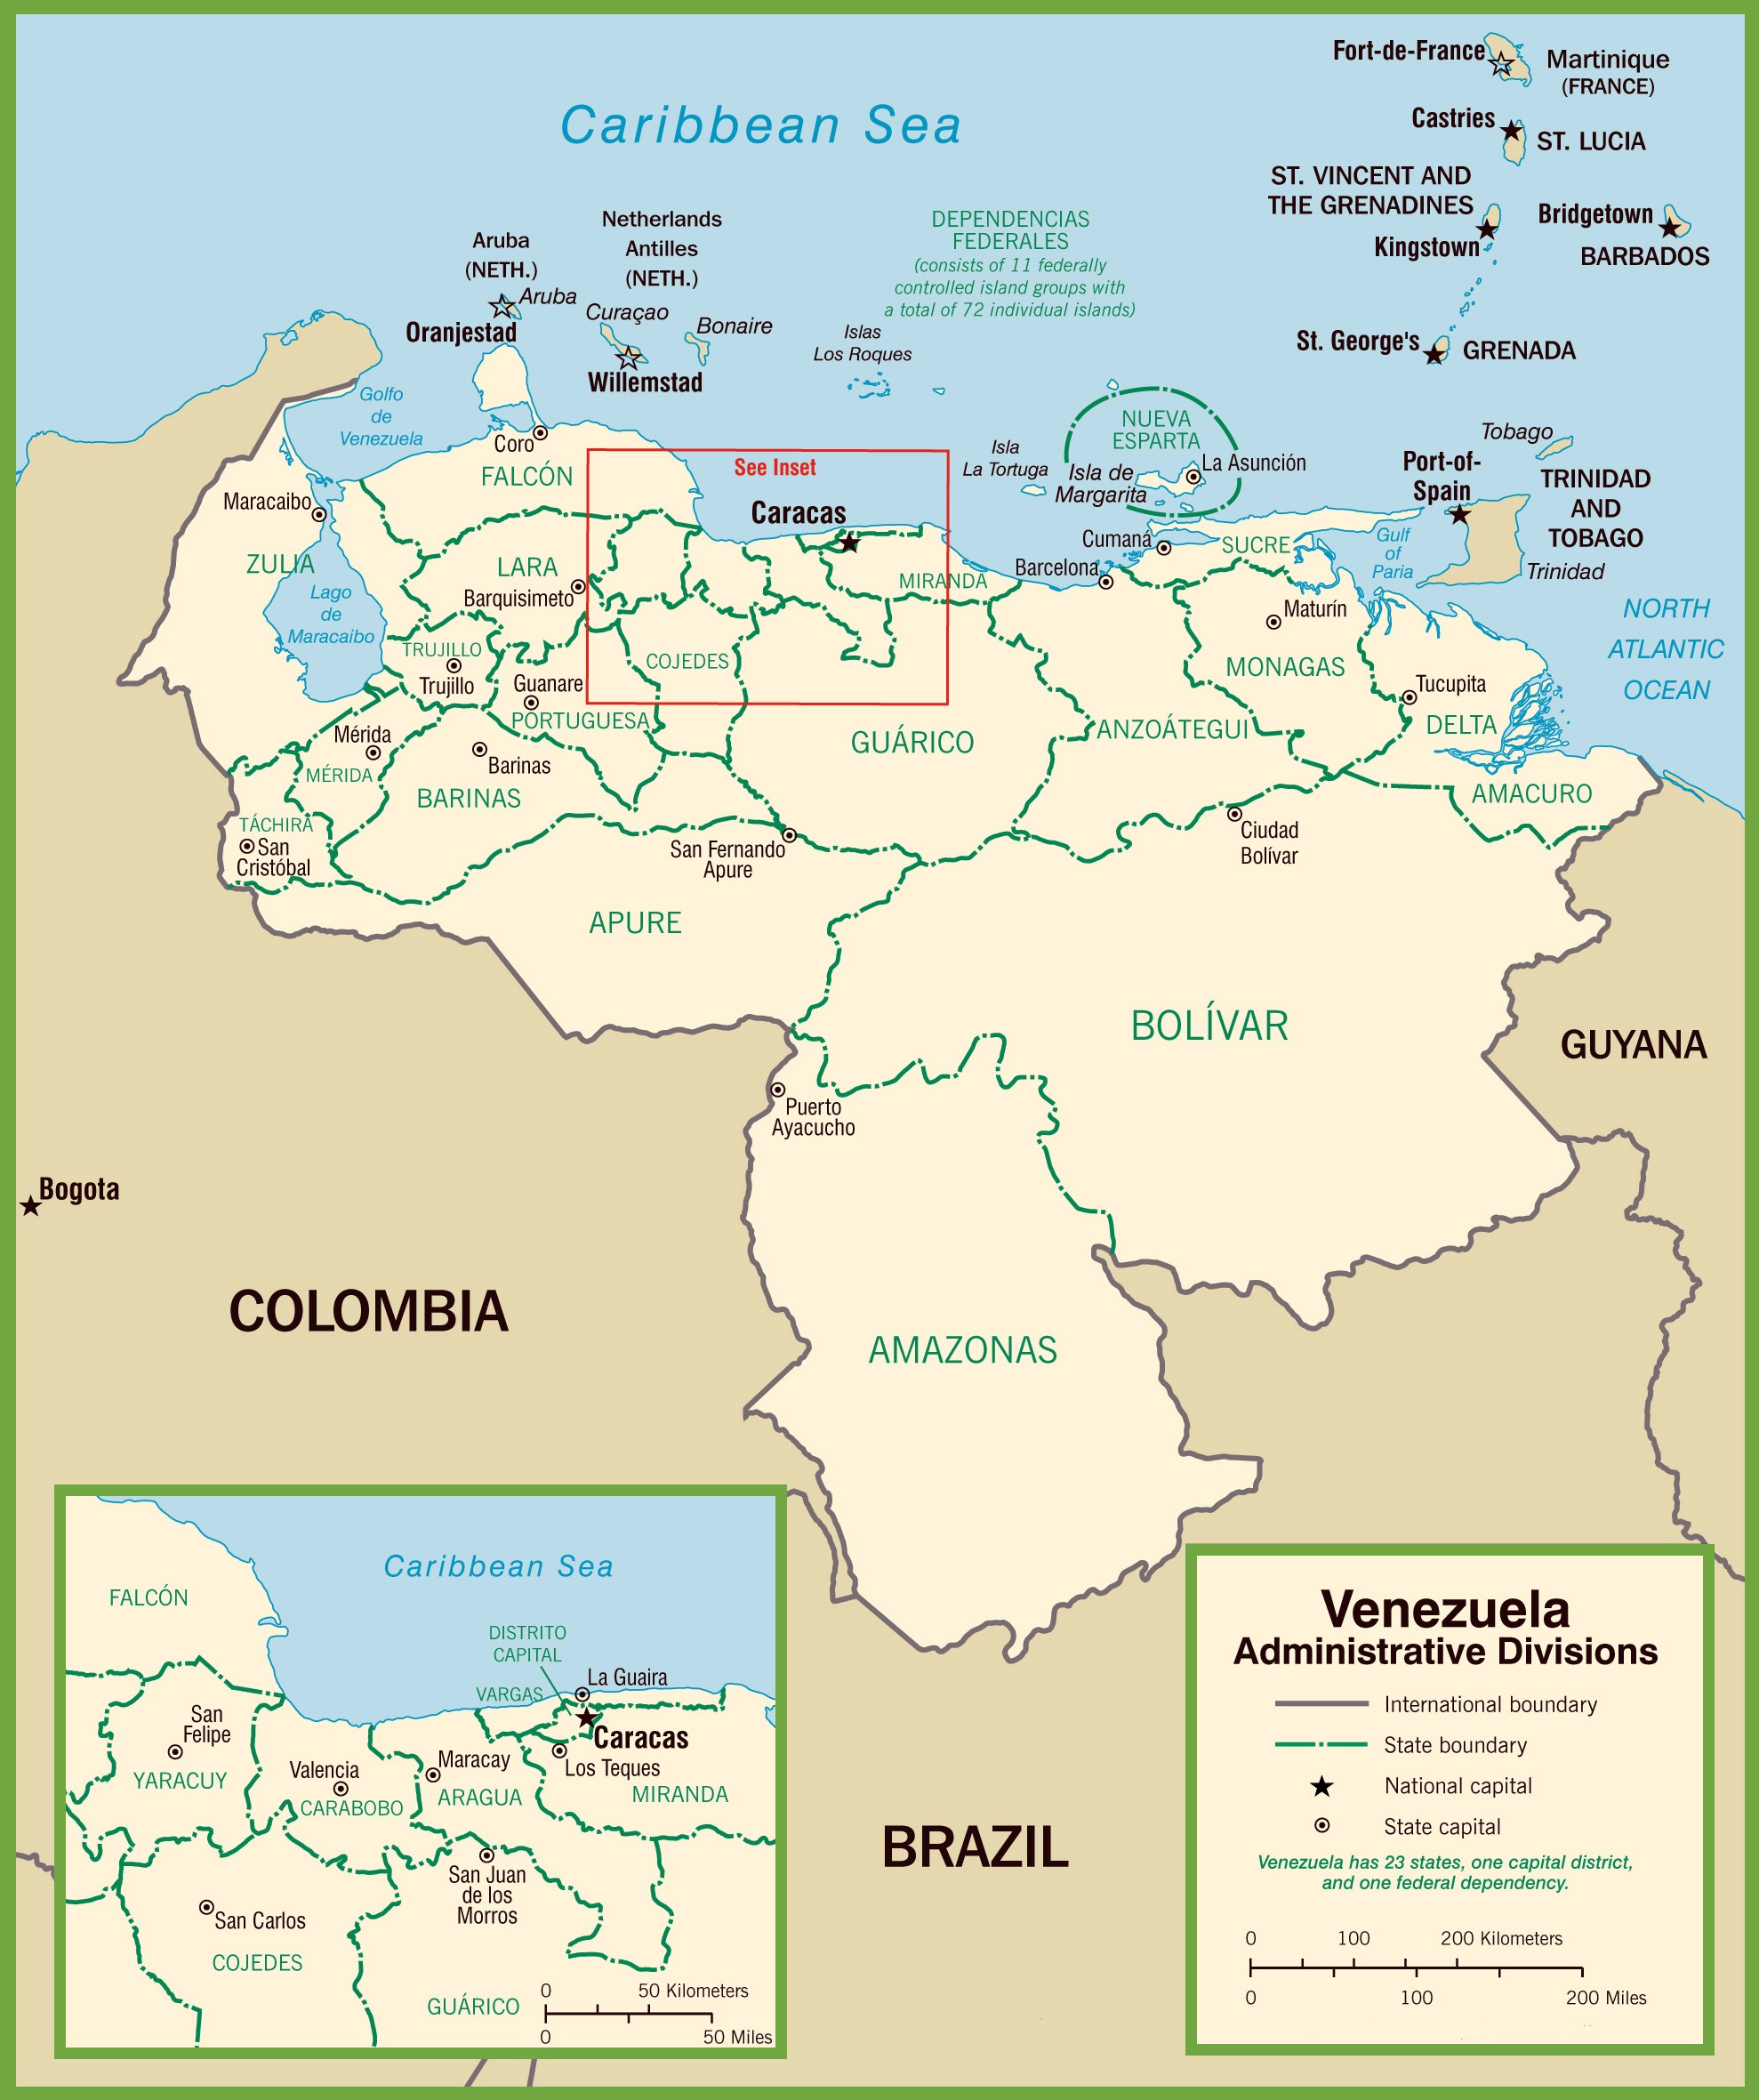 Venezuela Map Large Political Map Of Venezuela With Relief Roads And